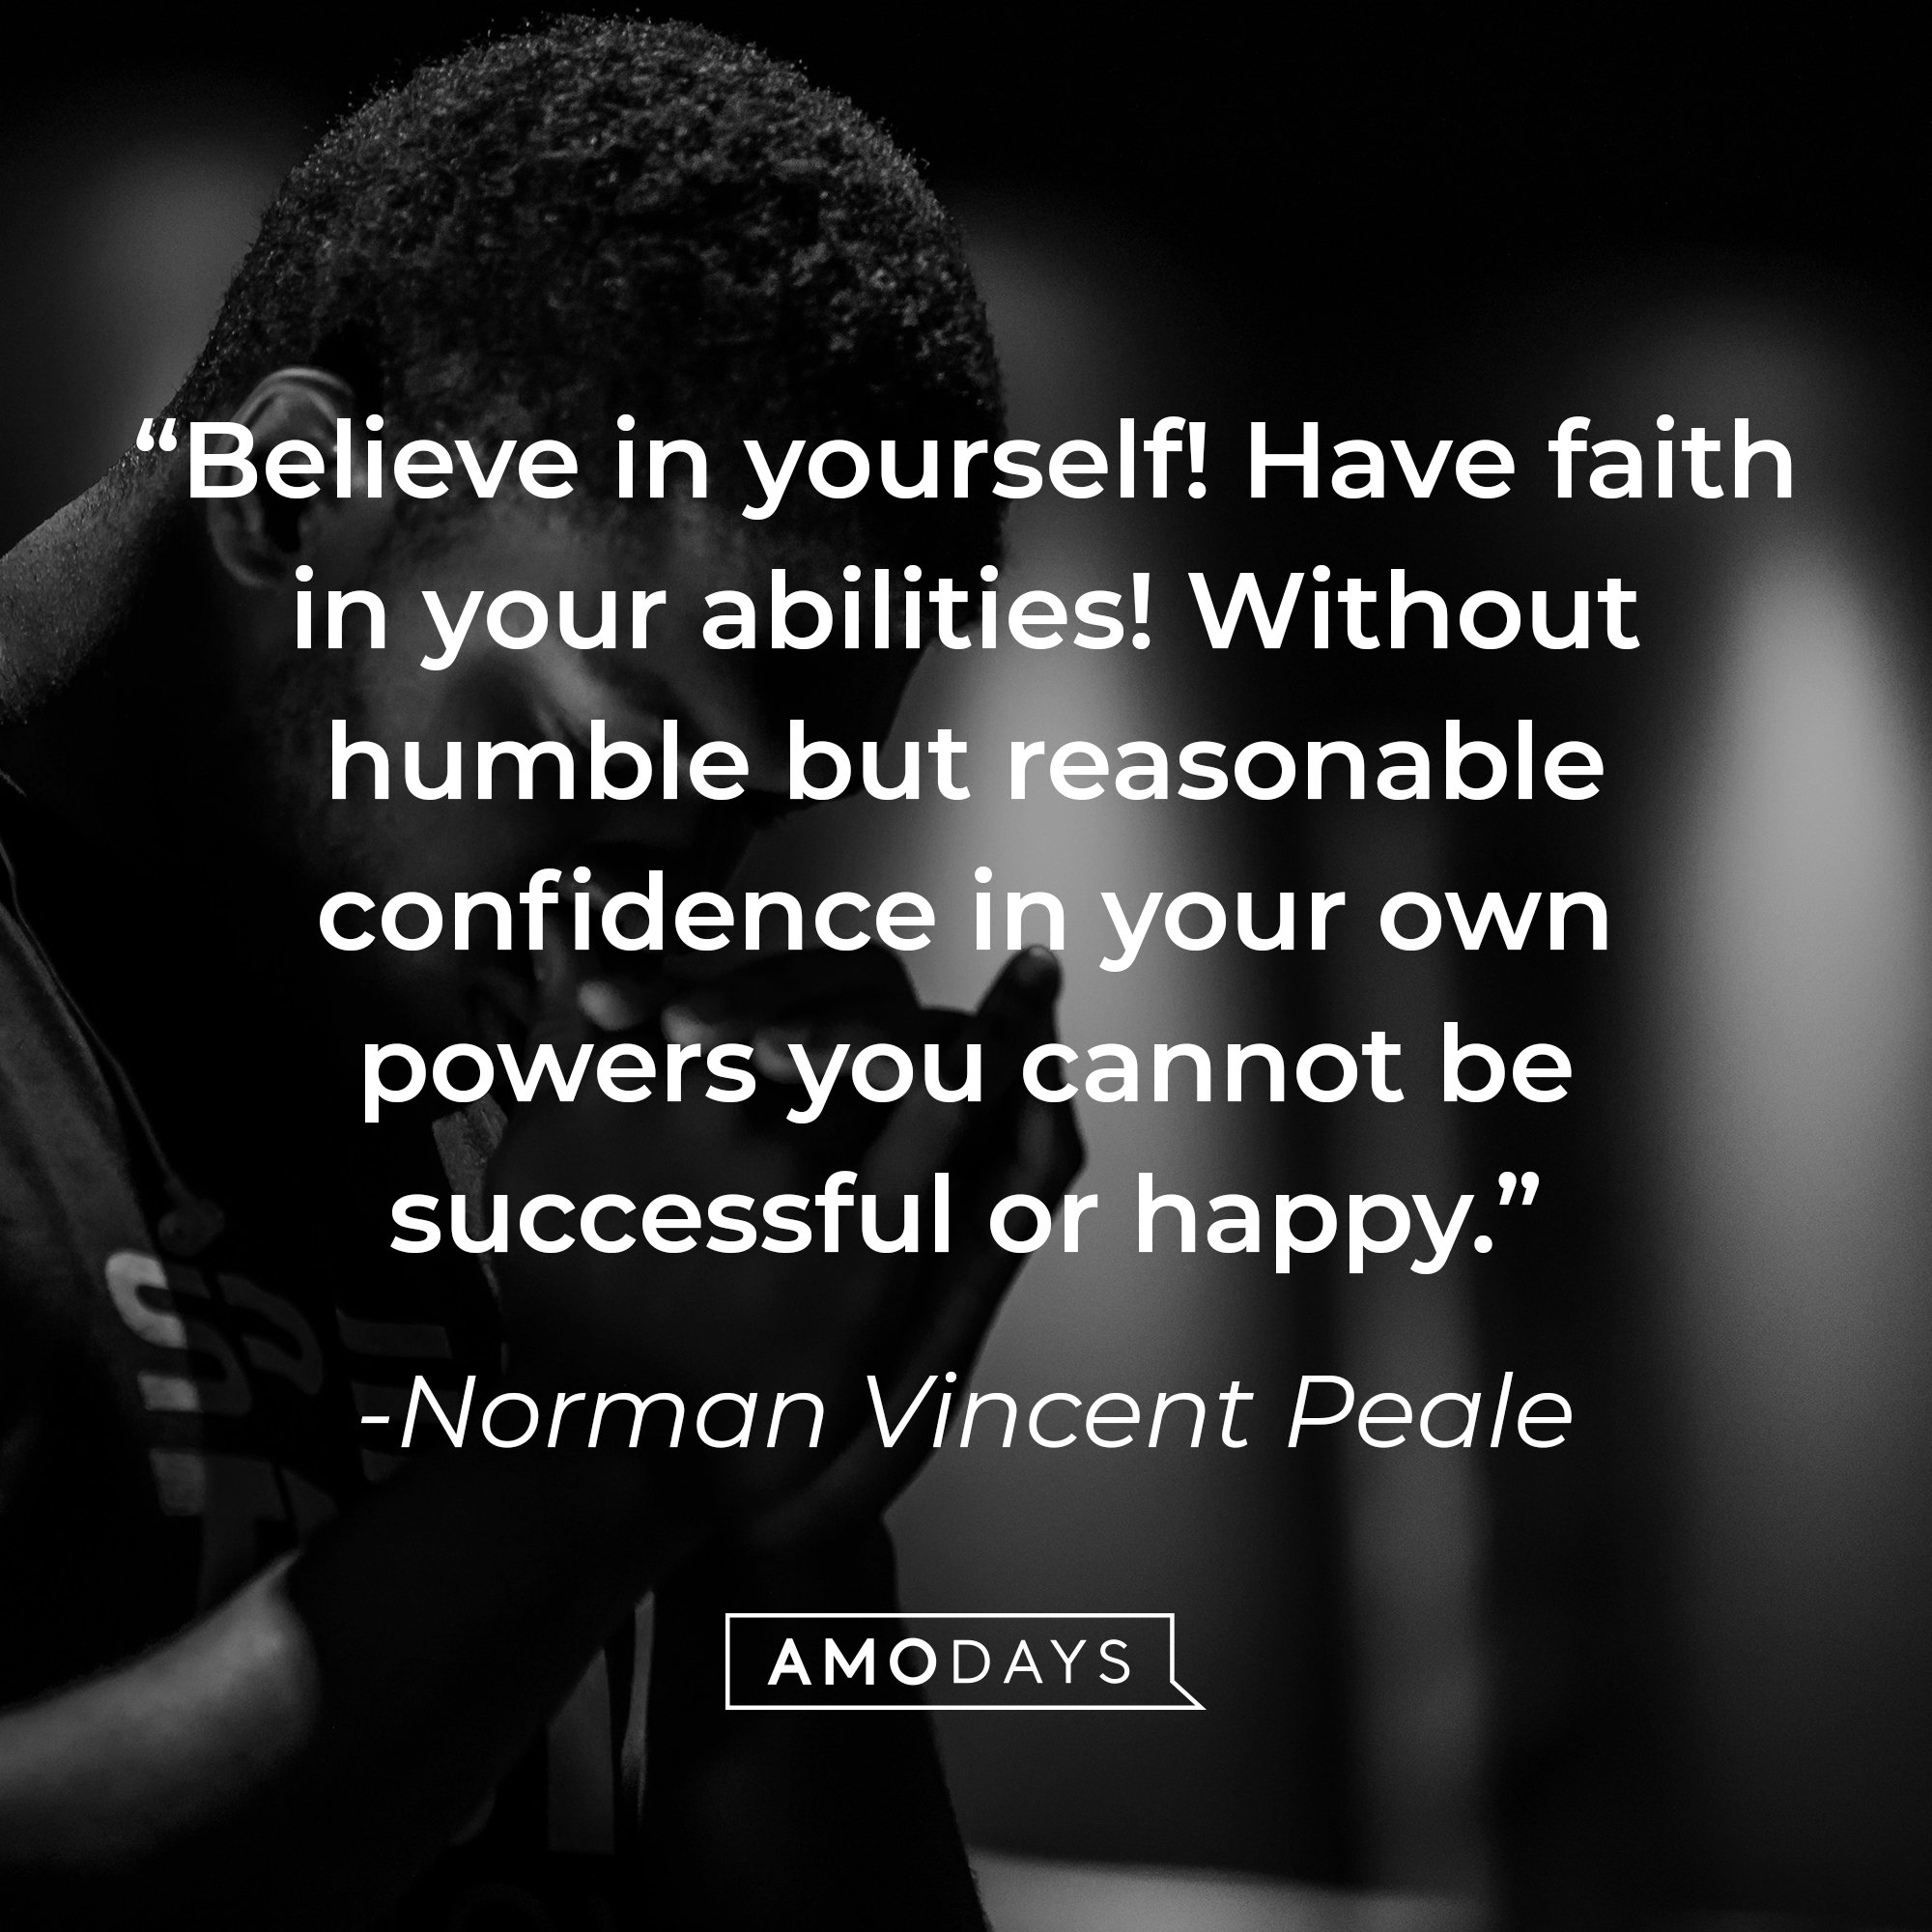 Norman Vincent Peale's quote: “Believe in yourself! Have faith in your abilities! Without humble but reasonable confidence in your own powers you cannot be successful or happy.” | Image: AmoDays